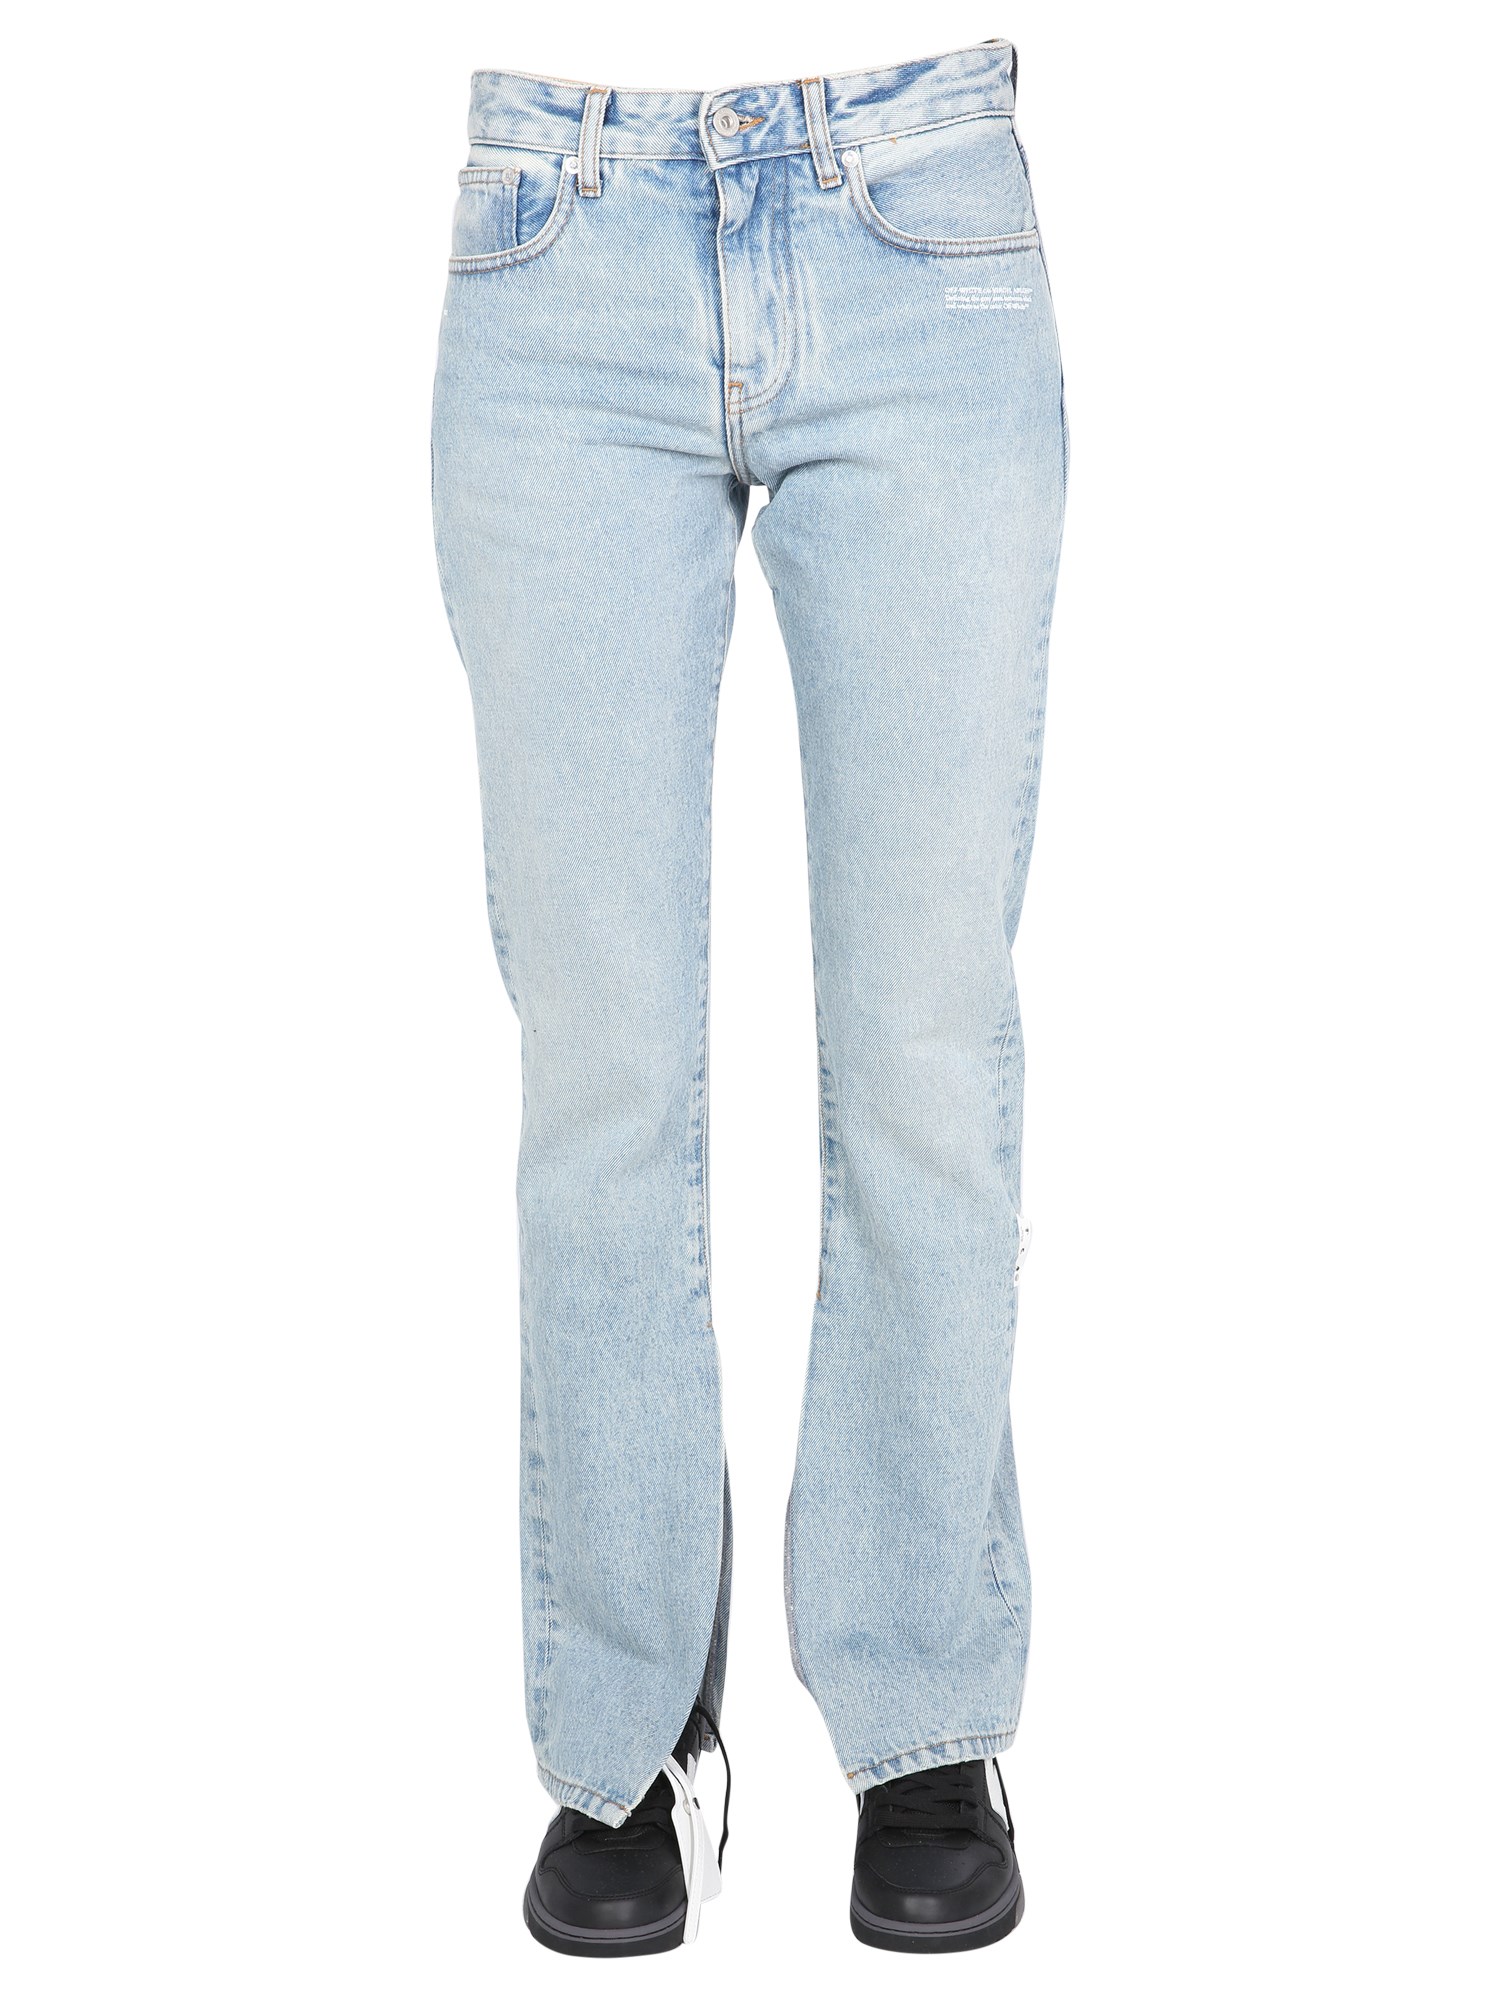 off-white slim fit jeans